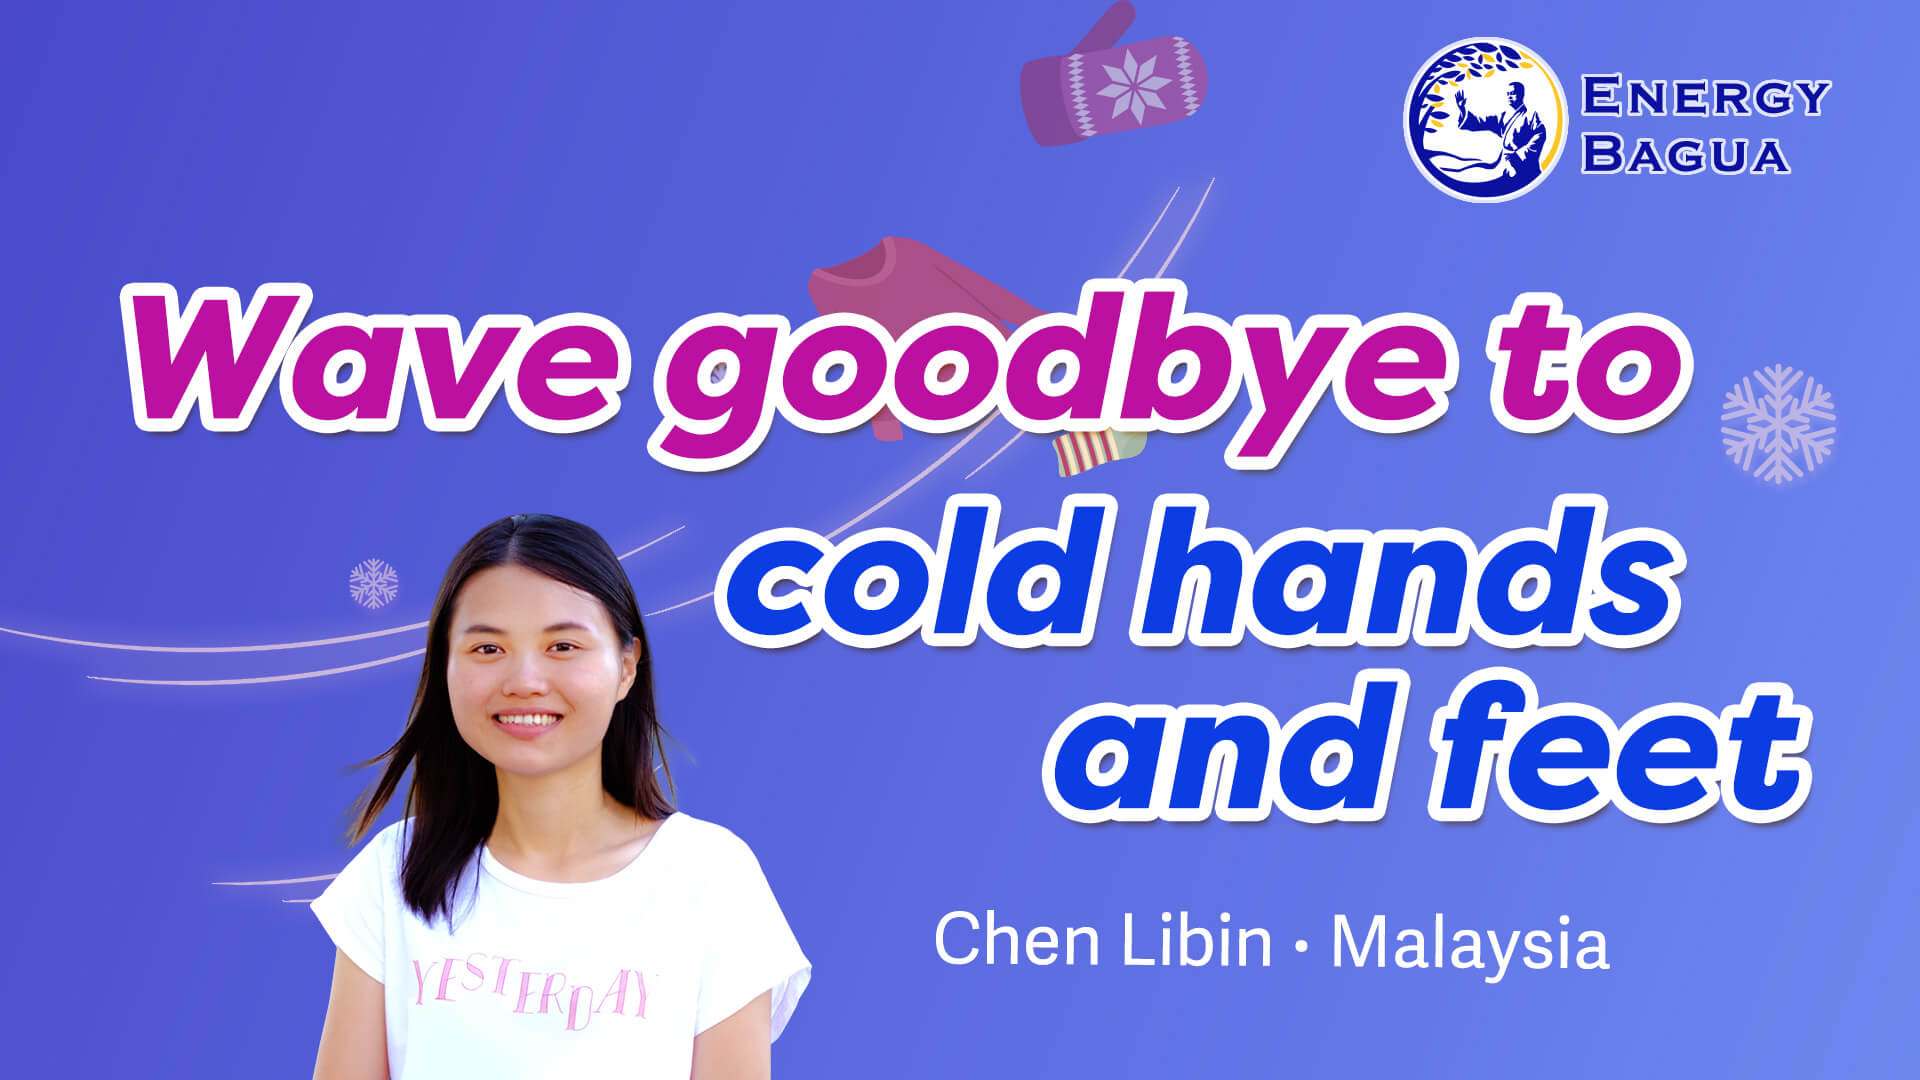 Wave goodbye to cold hands and feet